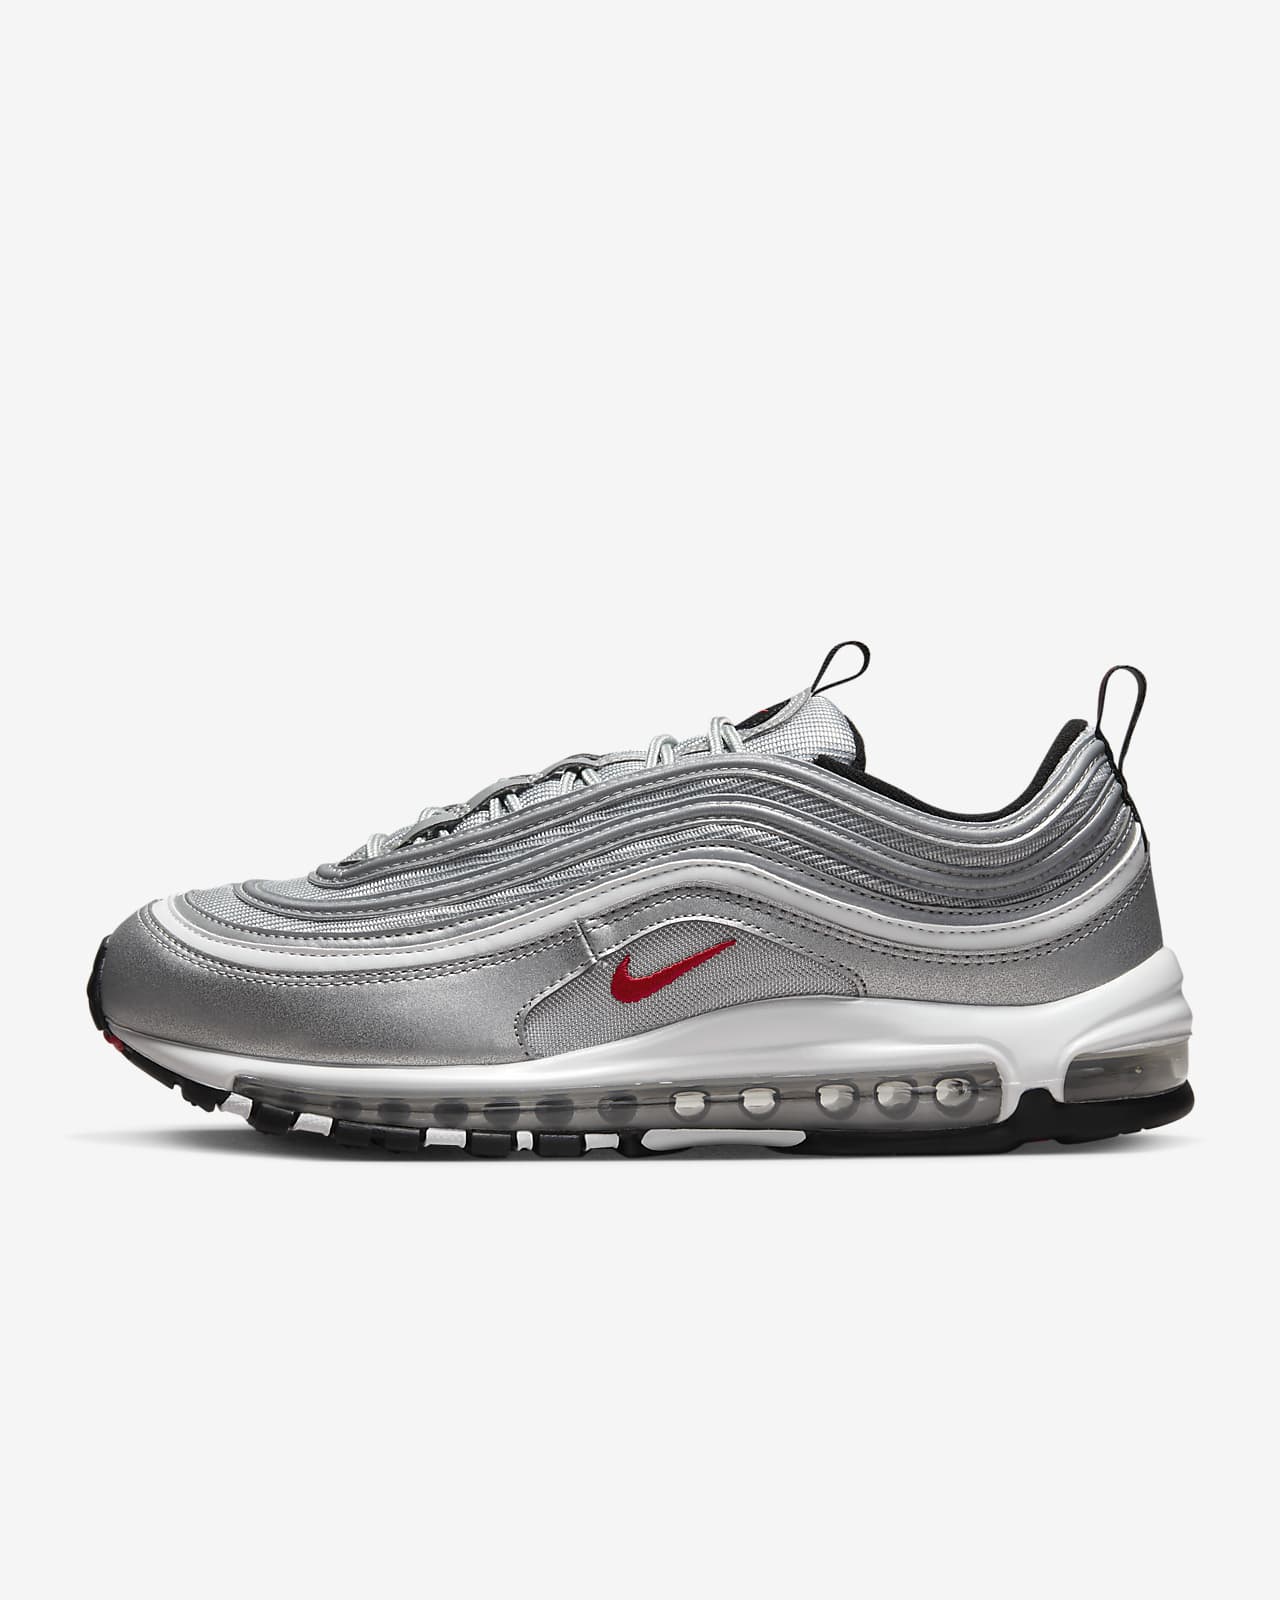 Chaussure Nike Max 97 OG pour Nike FR